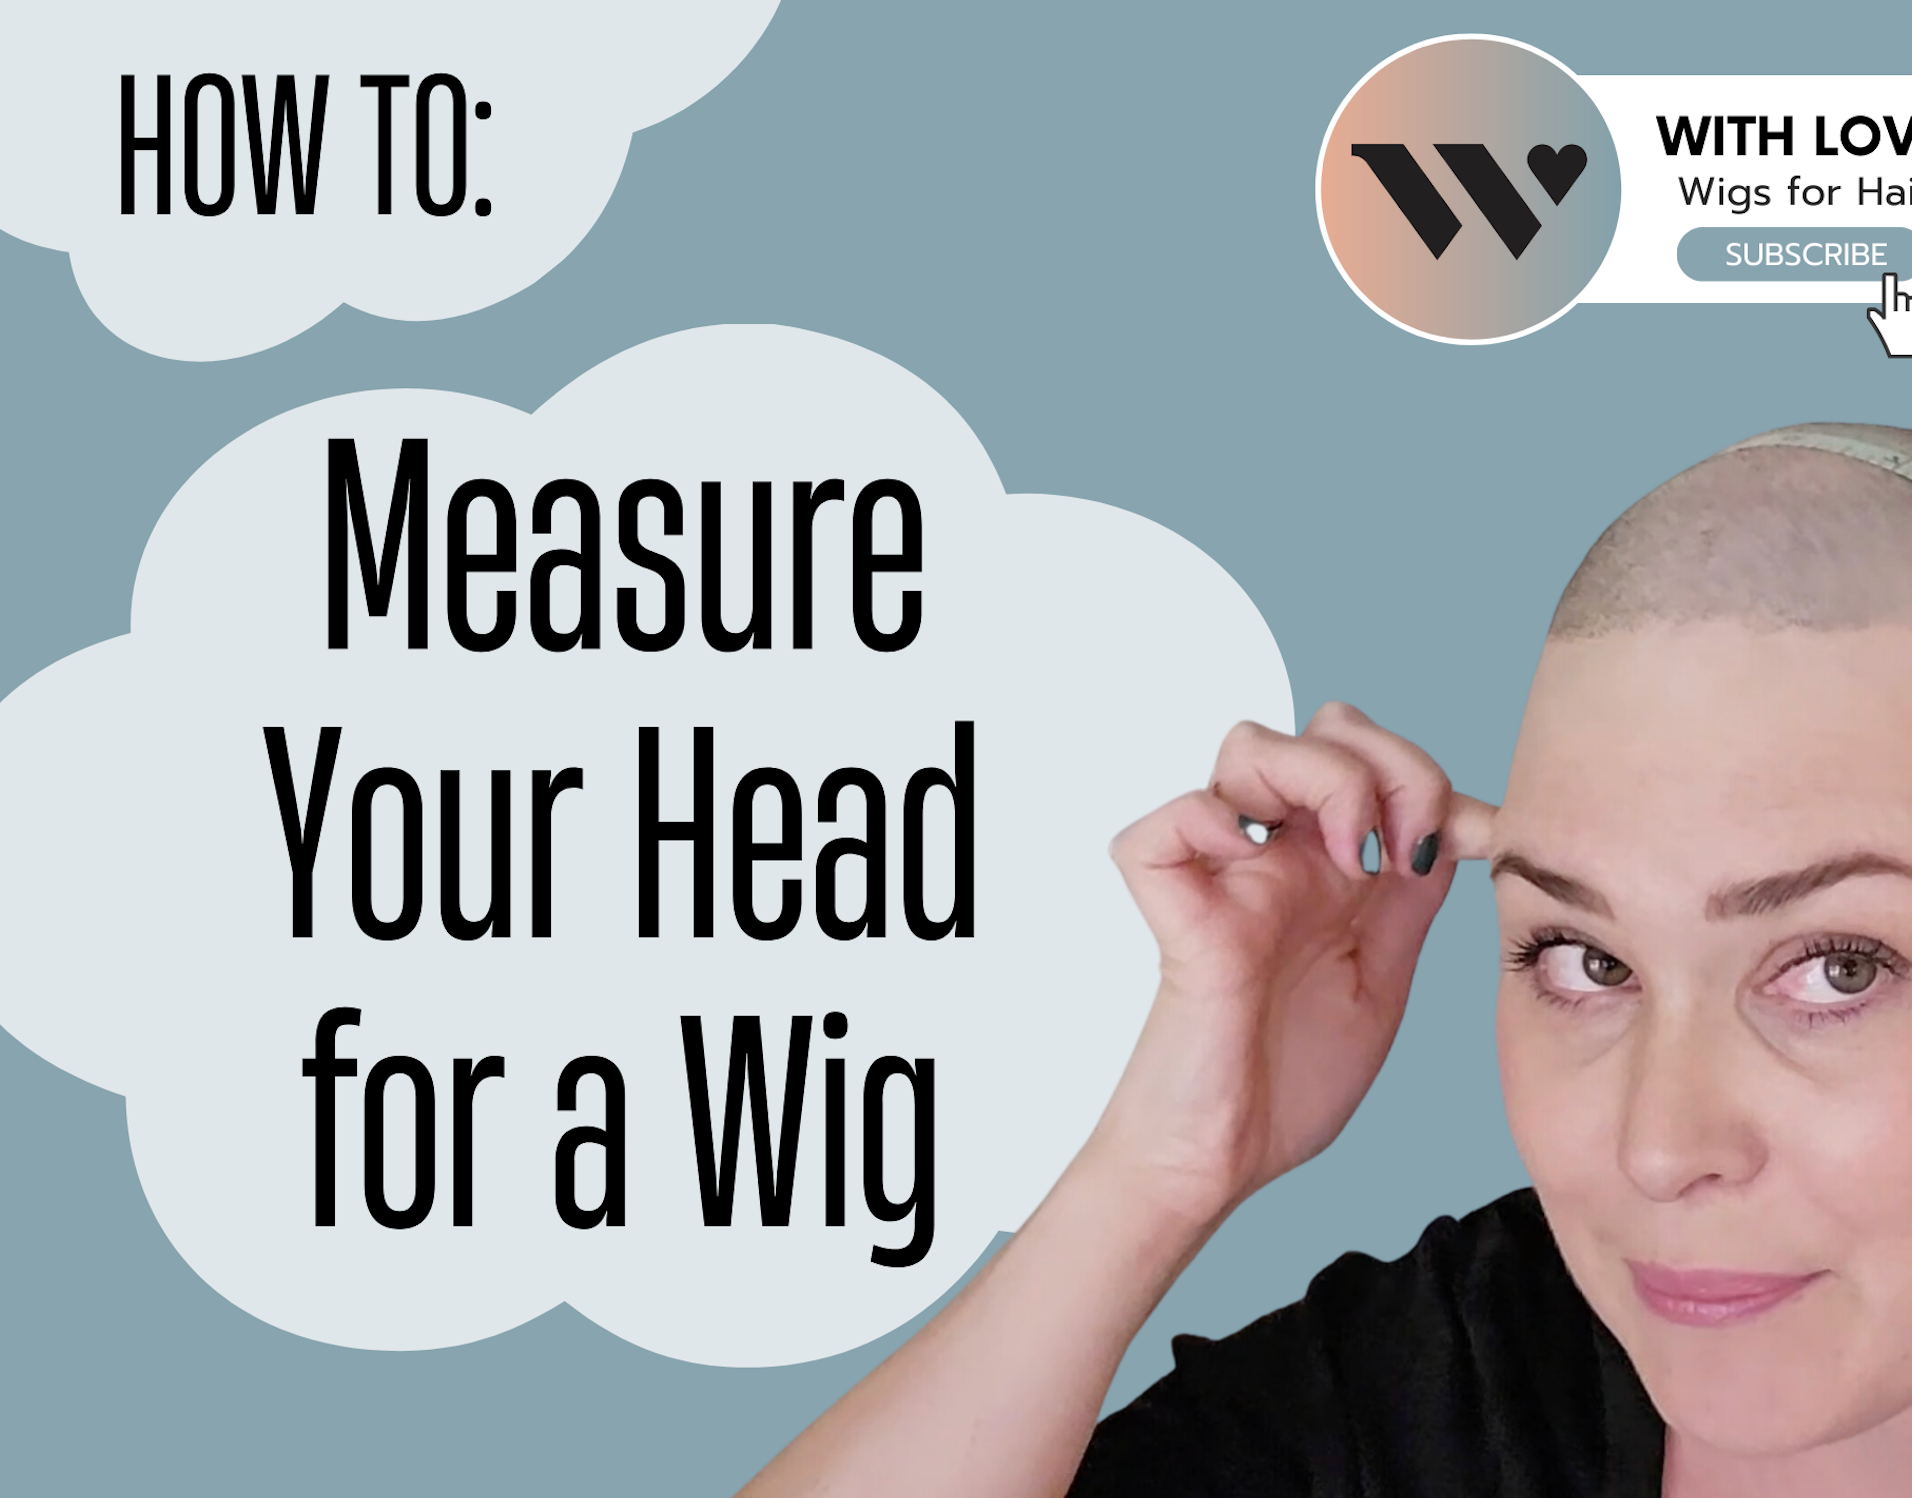 HOW TO: Measure your head for the perfect fit